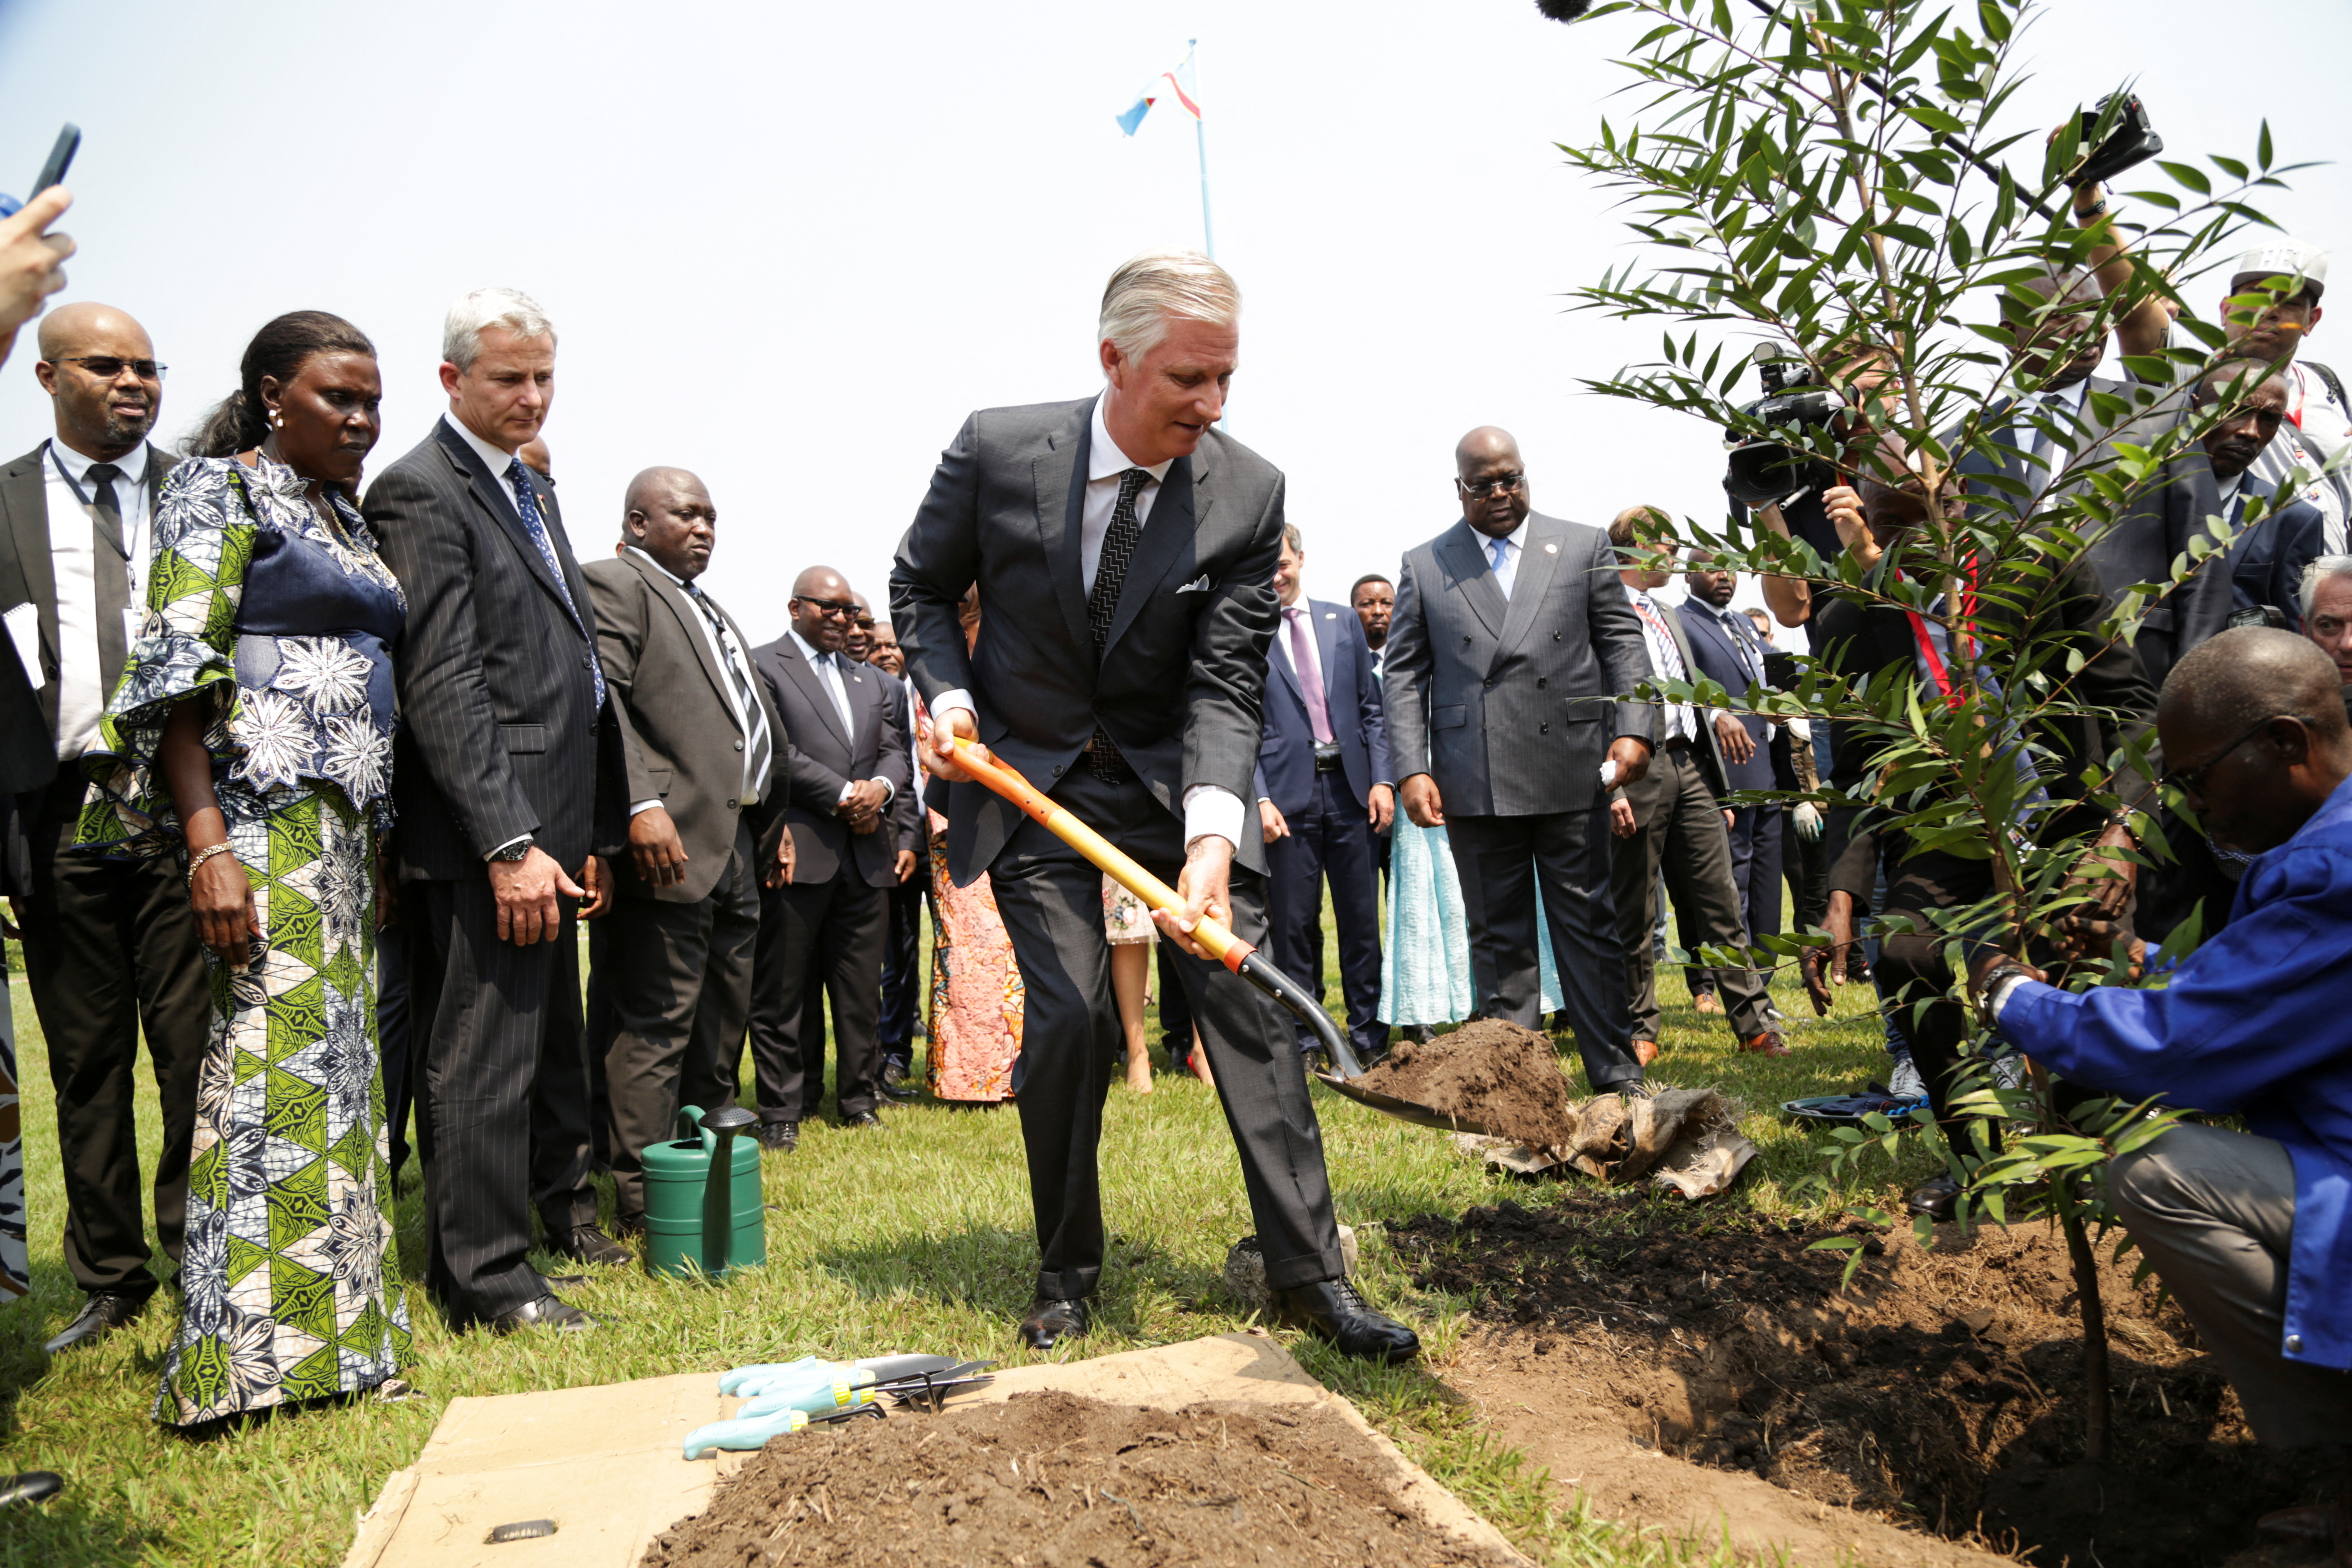 Belgium's King Philippe plants a tree at the Palais de la Nartion courtyard, during his official visit in Kinshasa